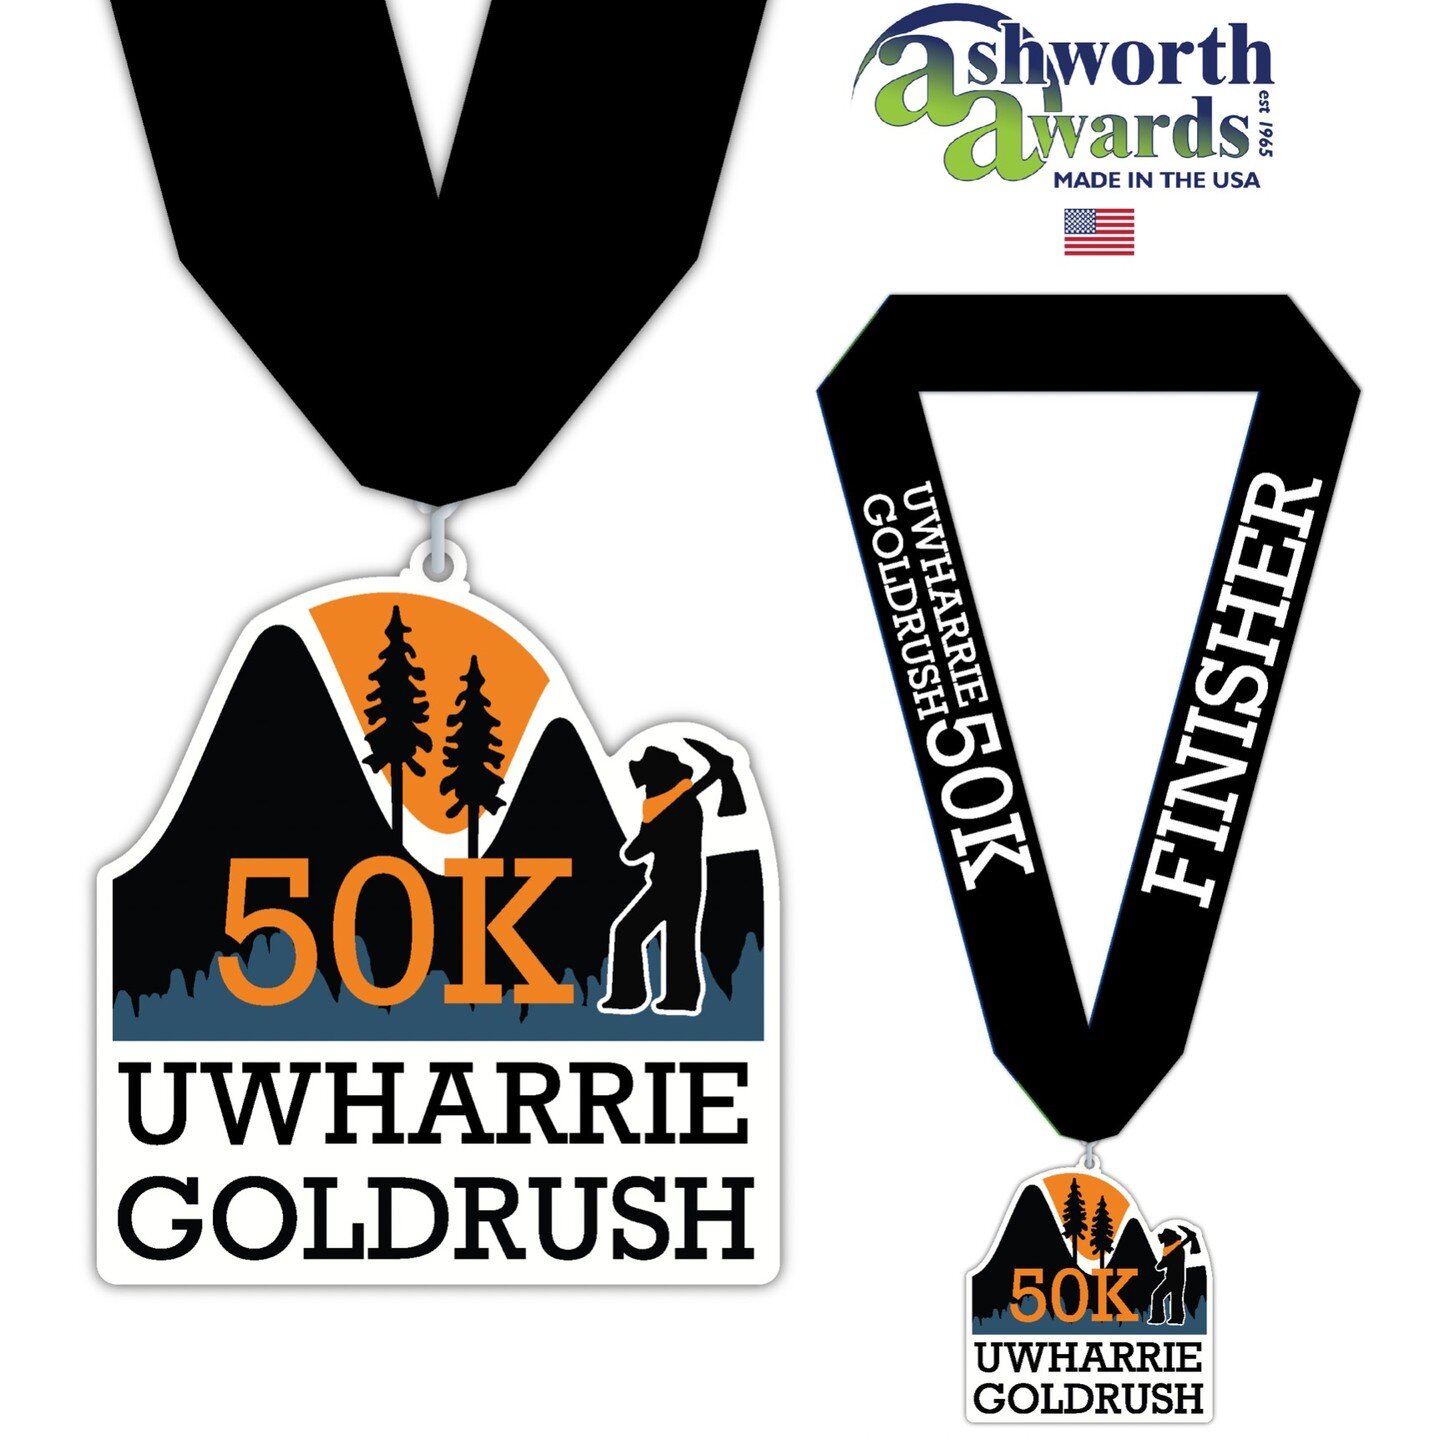 Sweet SWAG alert! The Uwharrie Gold Rush 50K Medals are in the works!! 

Design is approved and being casted by our good friends @ashworthawards! 

We can't wait to start handing these beauties out in October!

All the Trail Love,
Ryan and Meghaan
#s